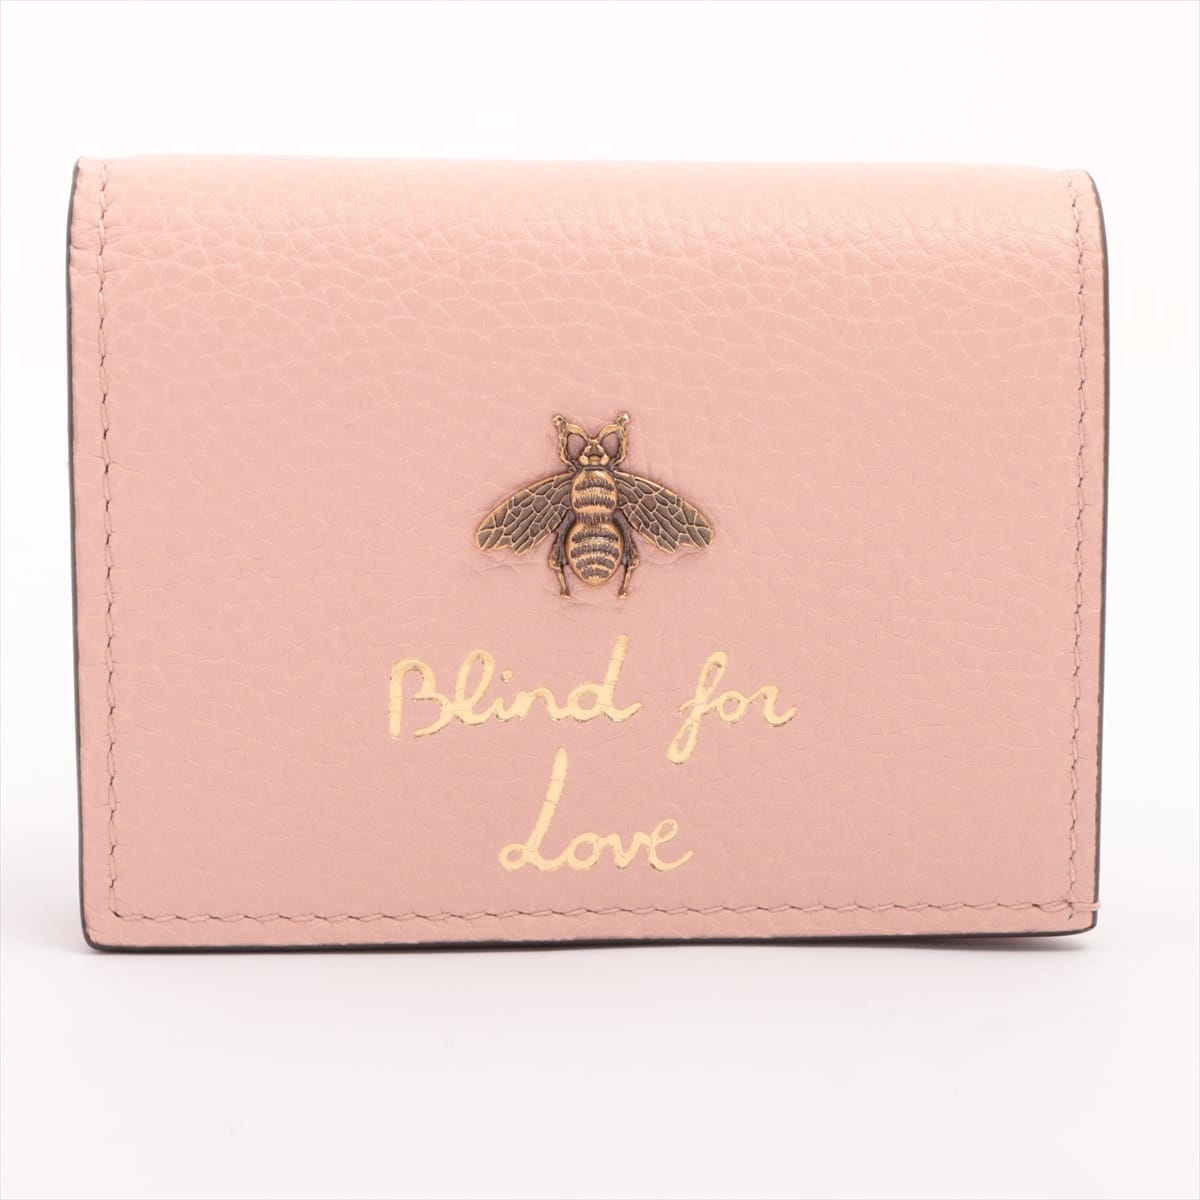 Gucci Animalier Bee 460185 Leather Wallet Pink